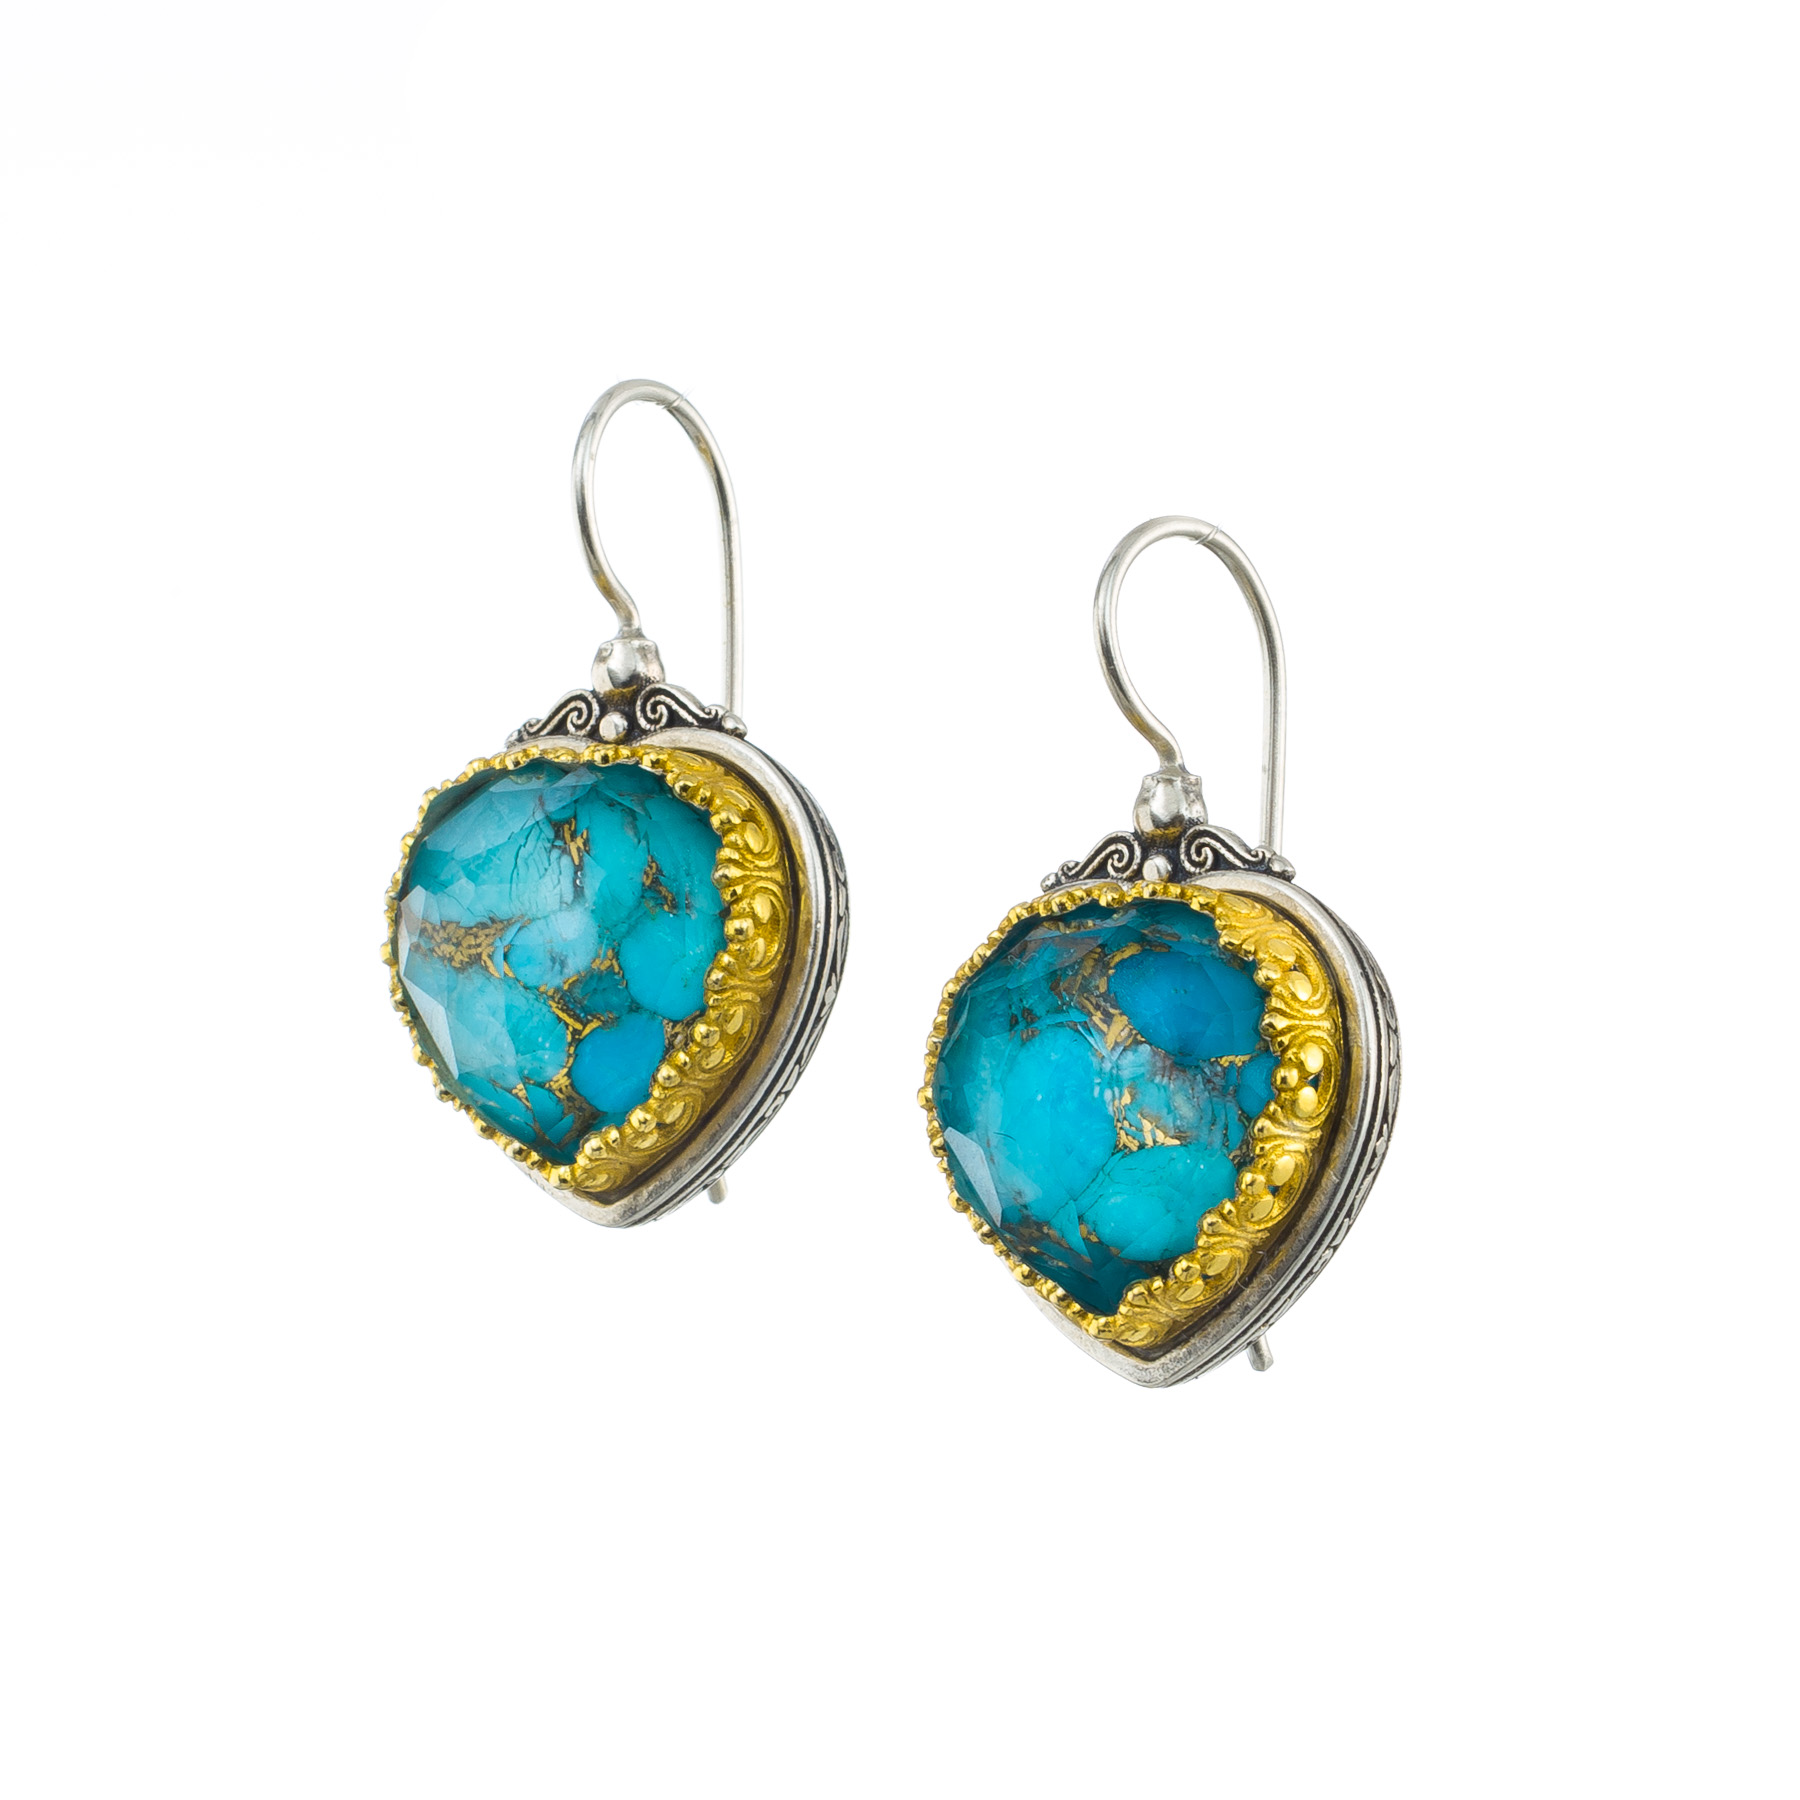 Iris Heart Earrings in Sterling Silver with Gold Plated Parts